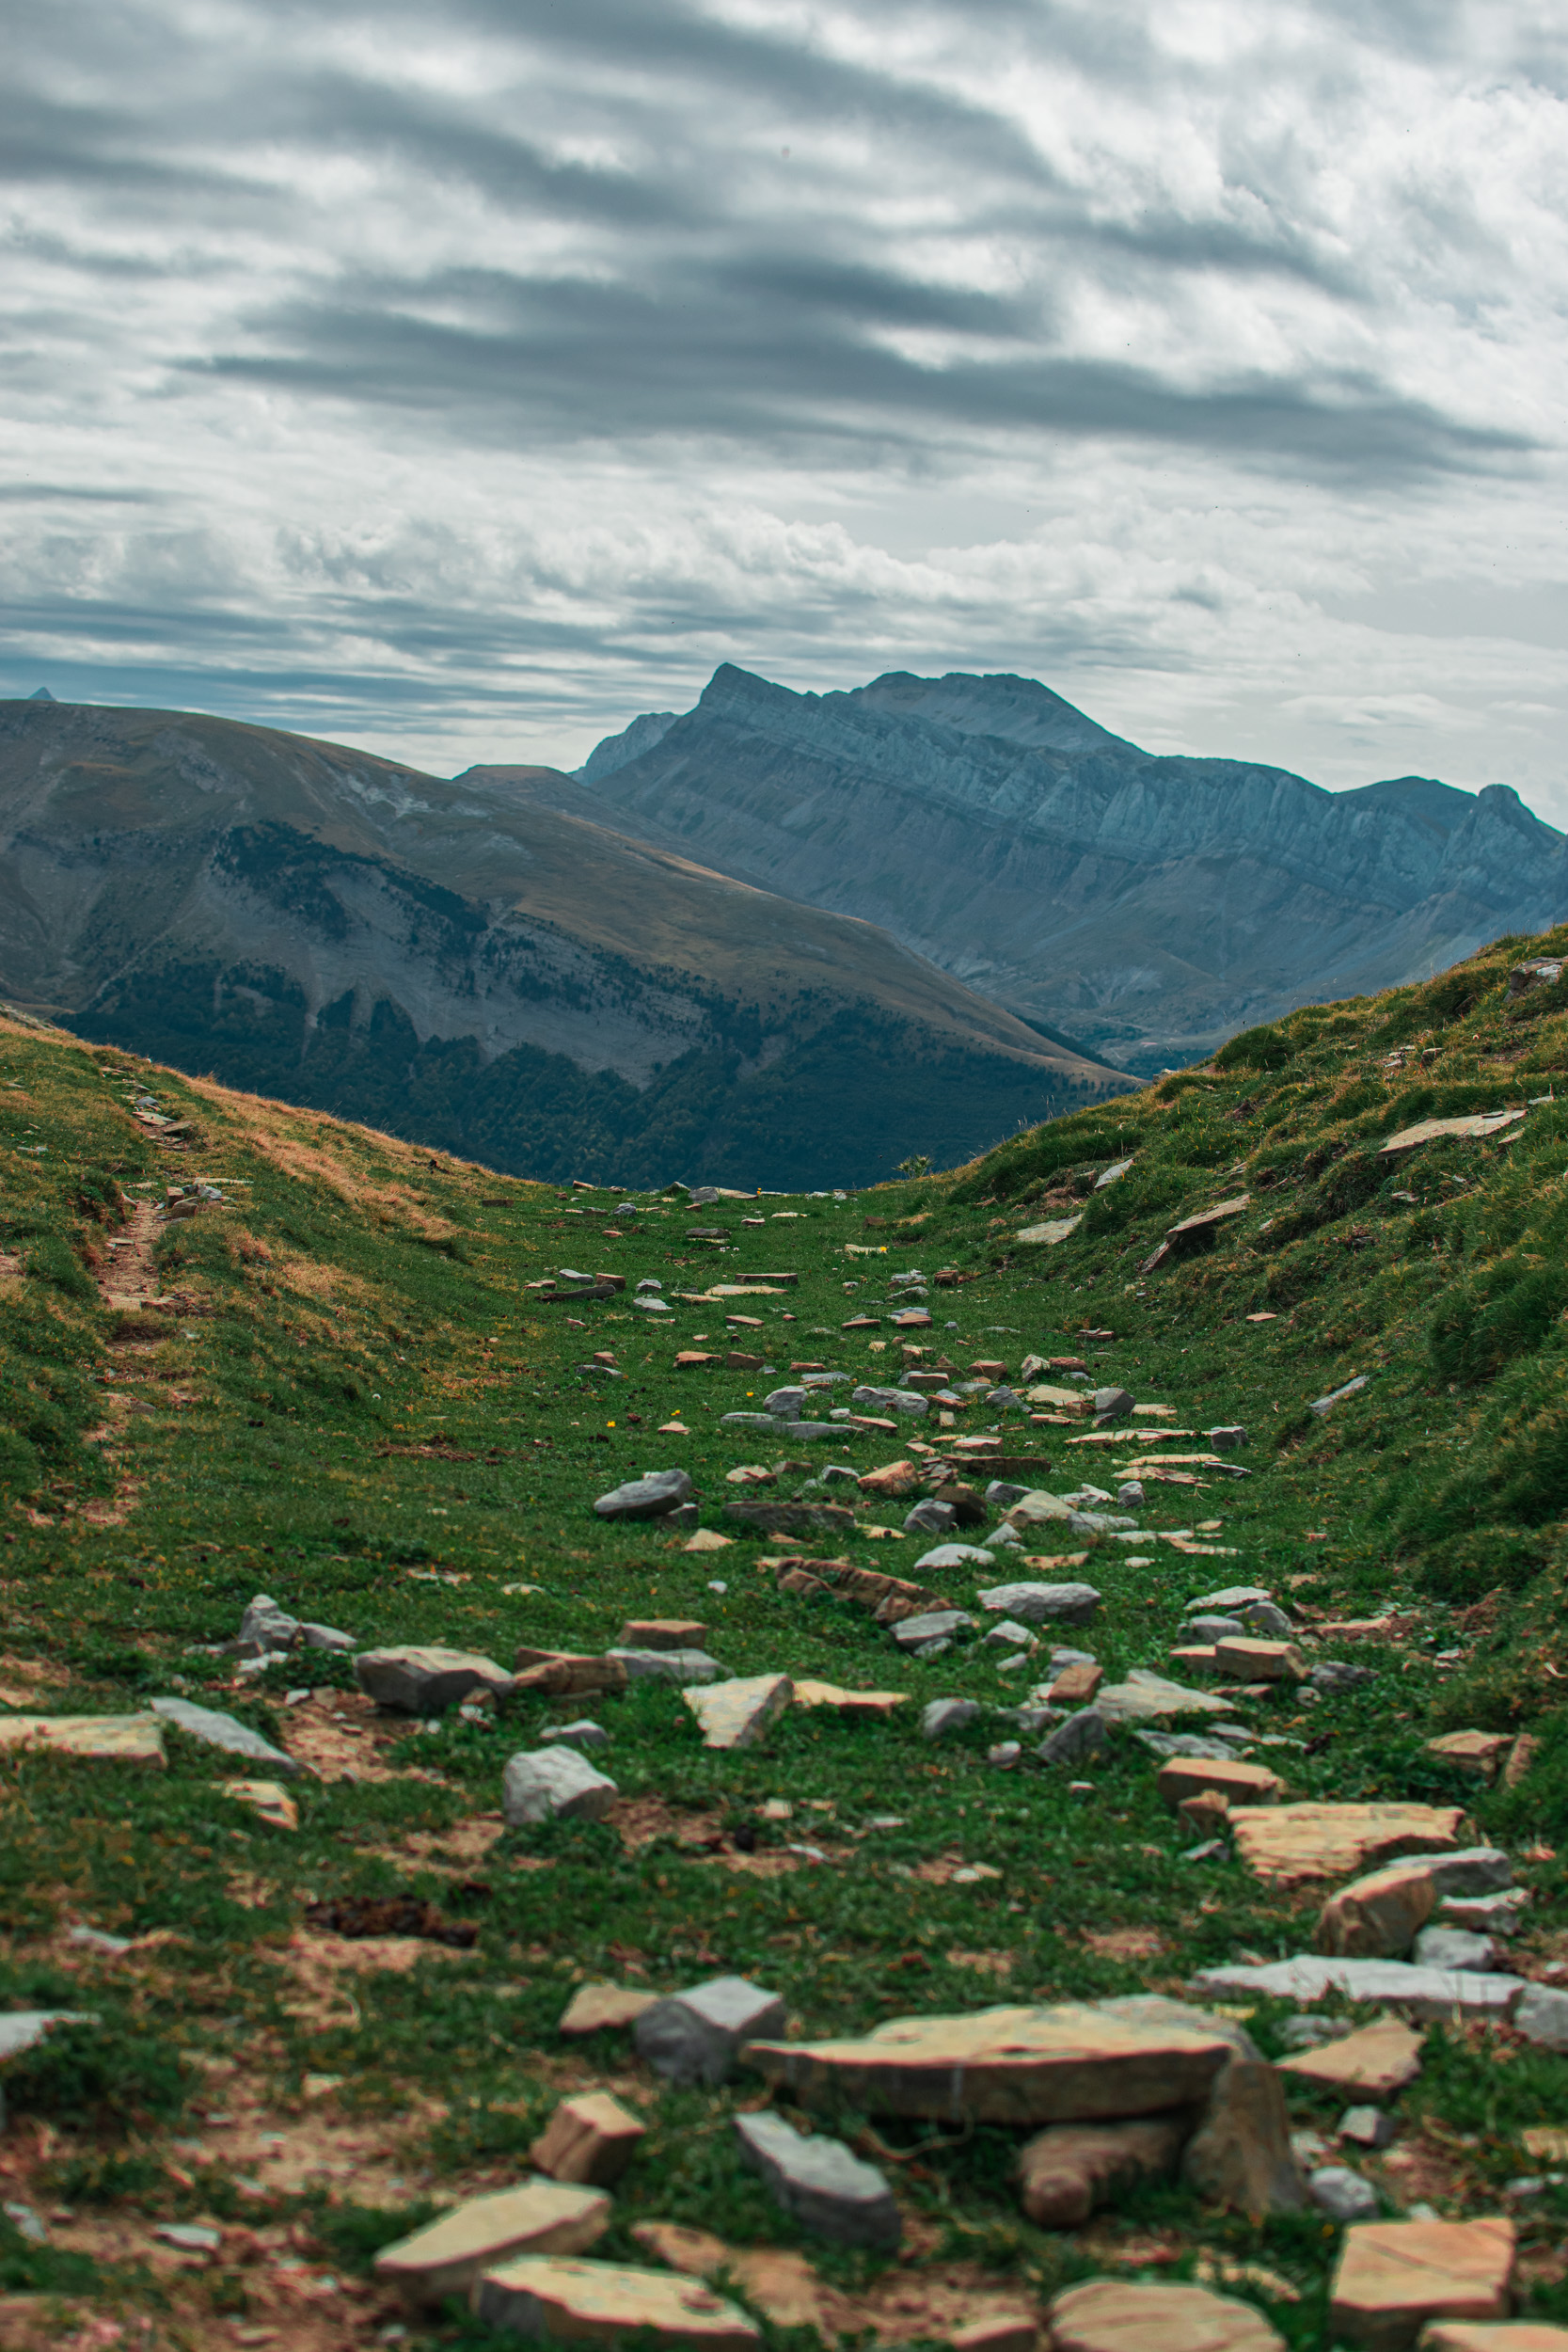 We came to this path looking straight at one of the surrounding mountain peaks of the Pyrenees.